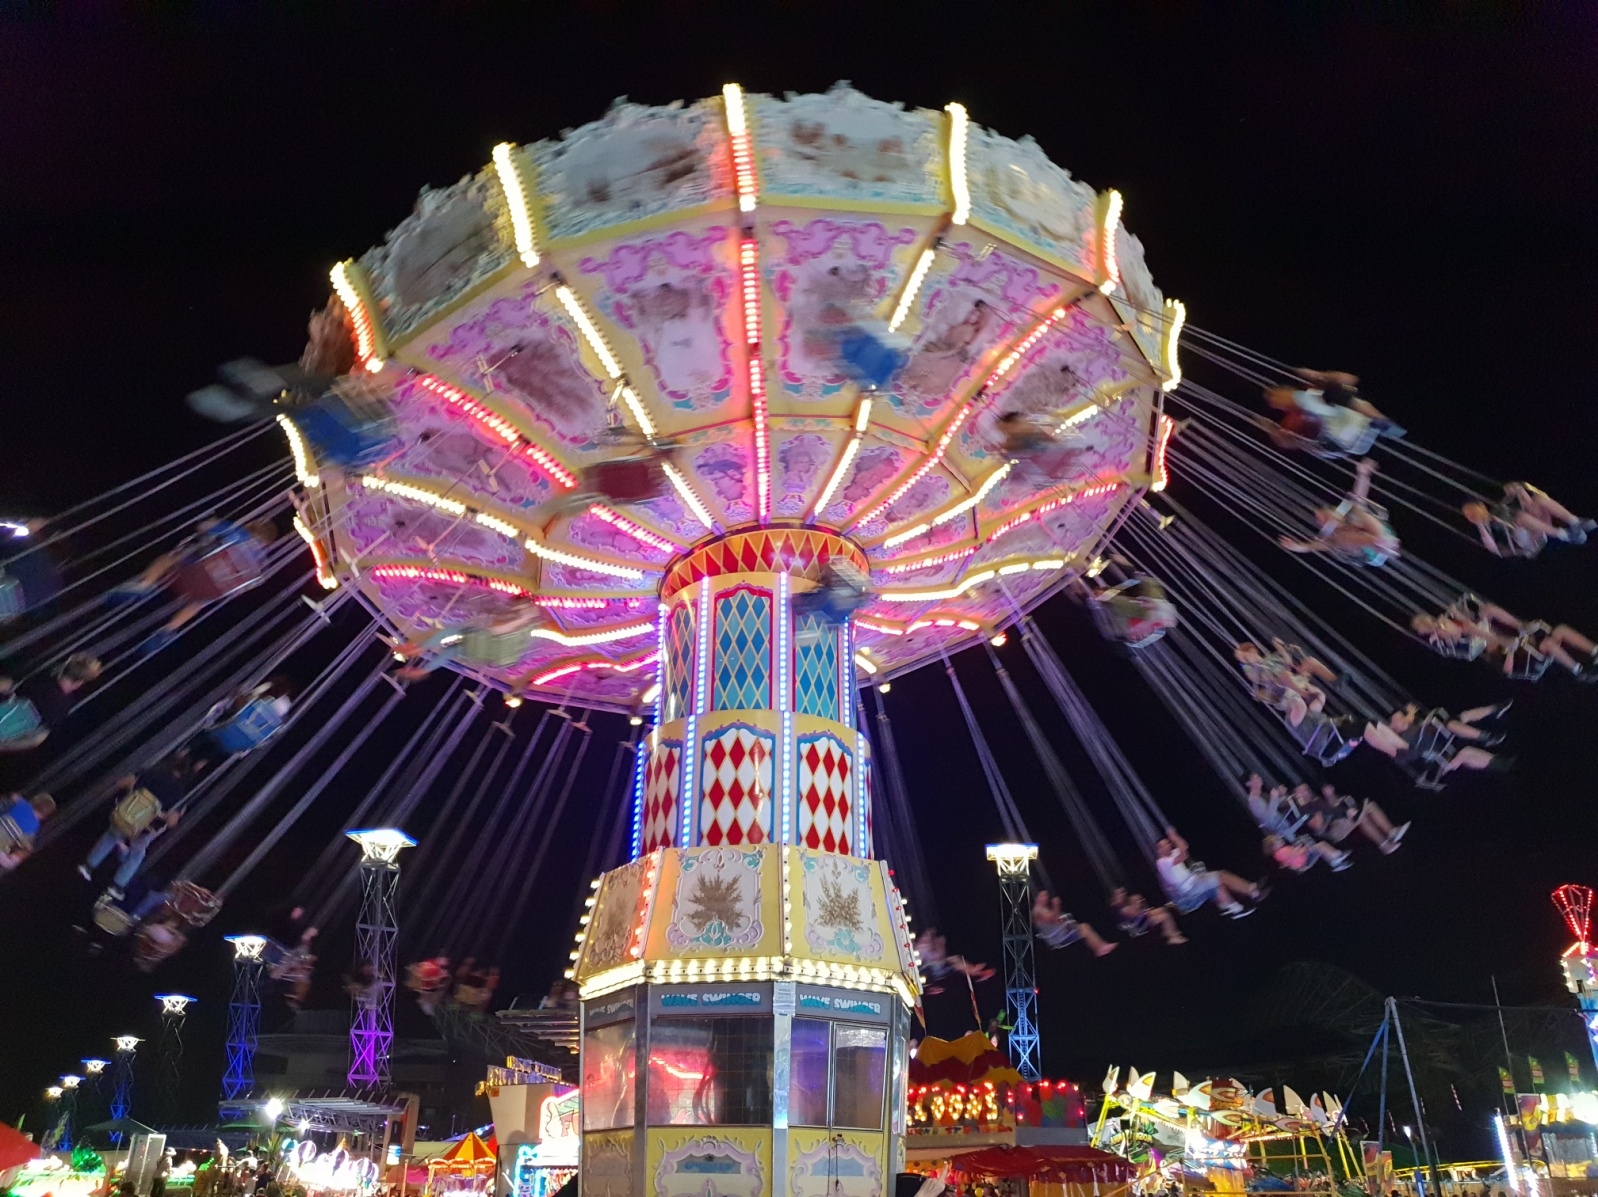 Z:\637-20190323\Final\B Section\B04-05\Carnival at night at the Sydney Royal Easter Show.jpg